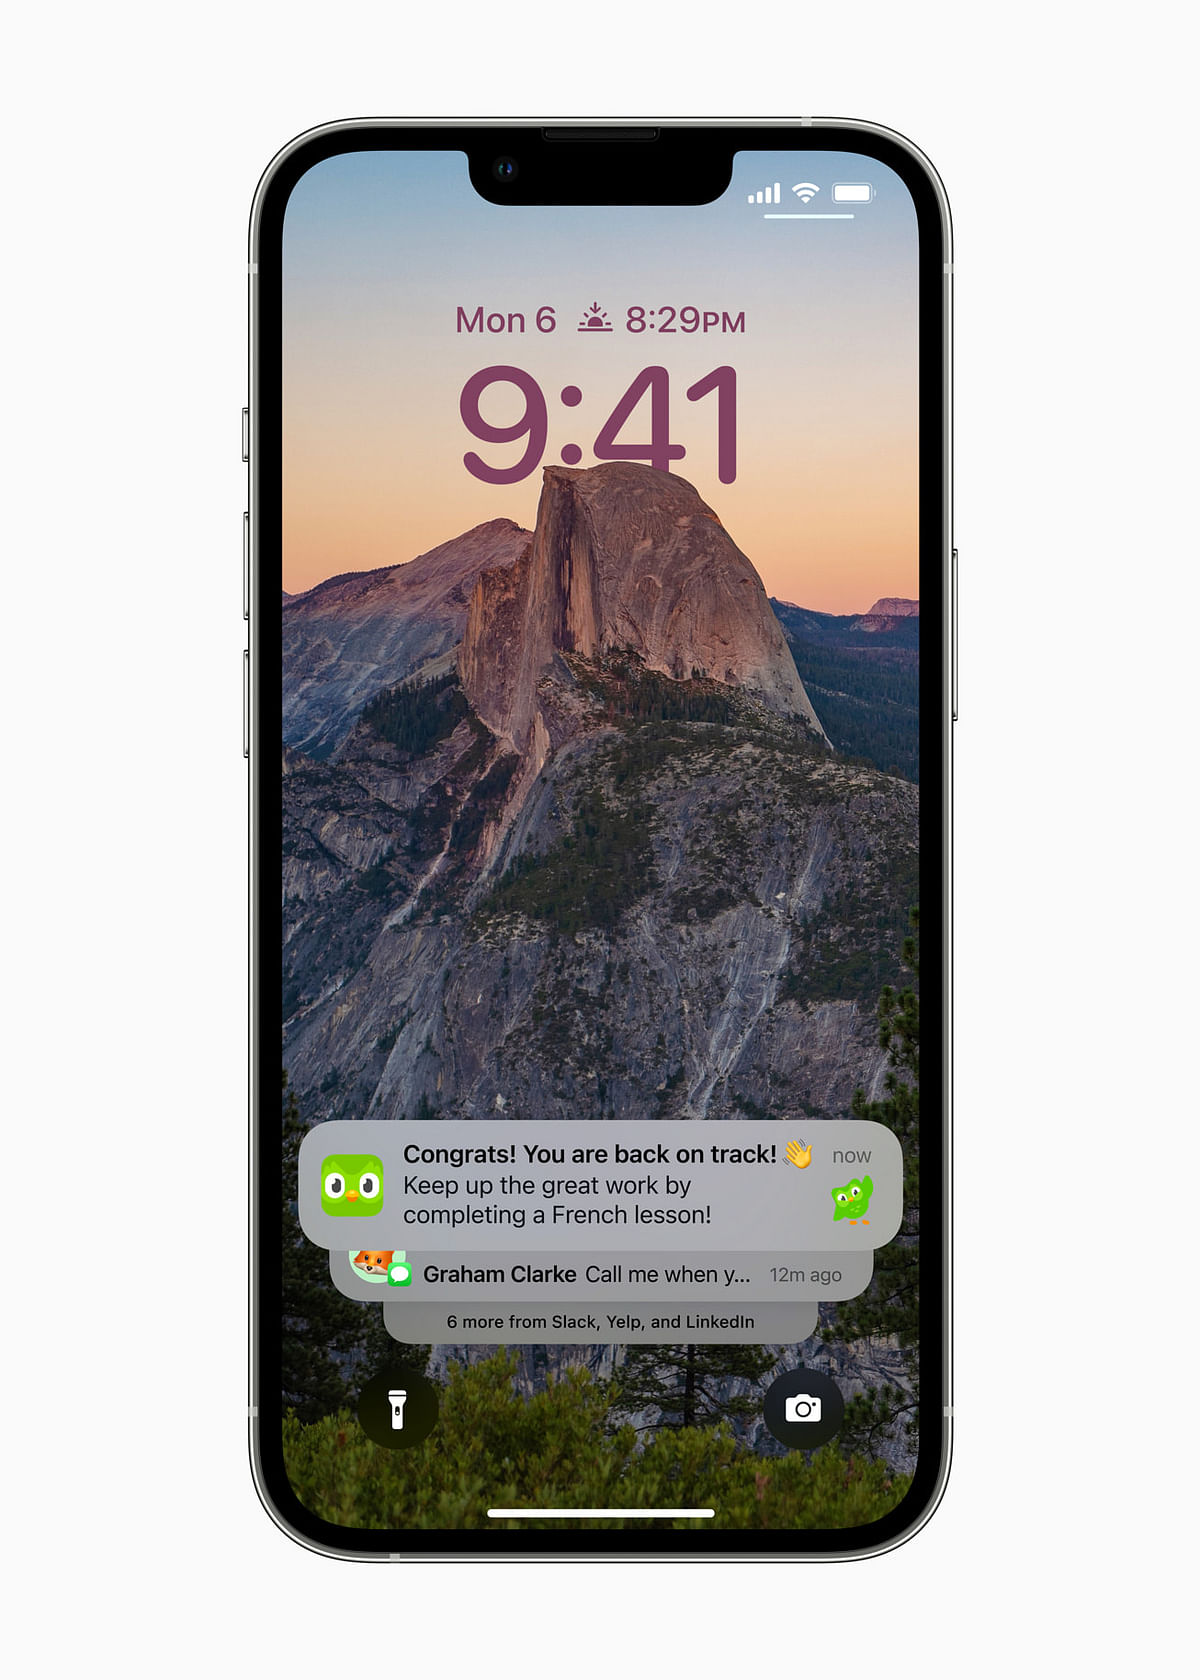 Apple introduces updates to iPhone's lock screen with iOS 16 with new ad